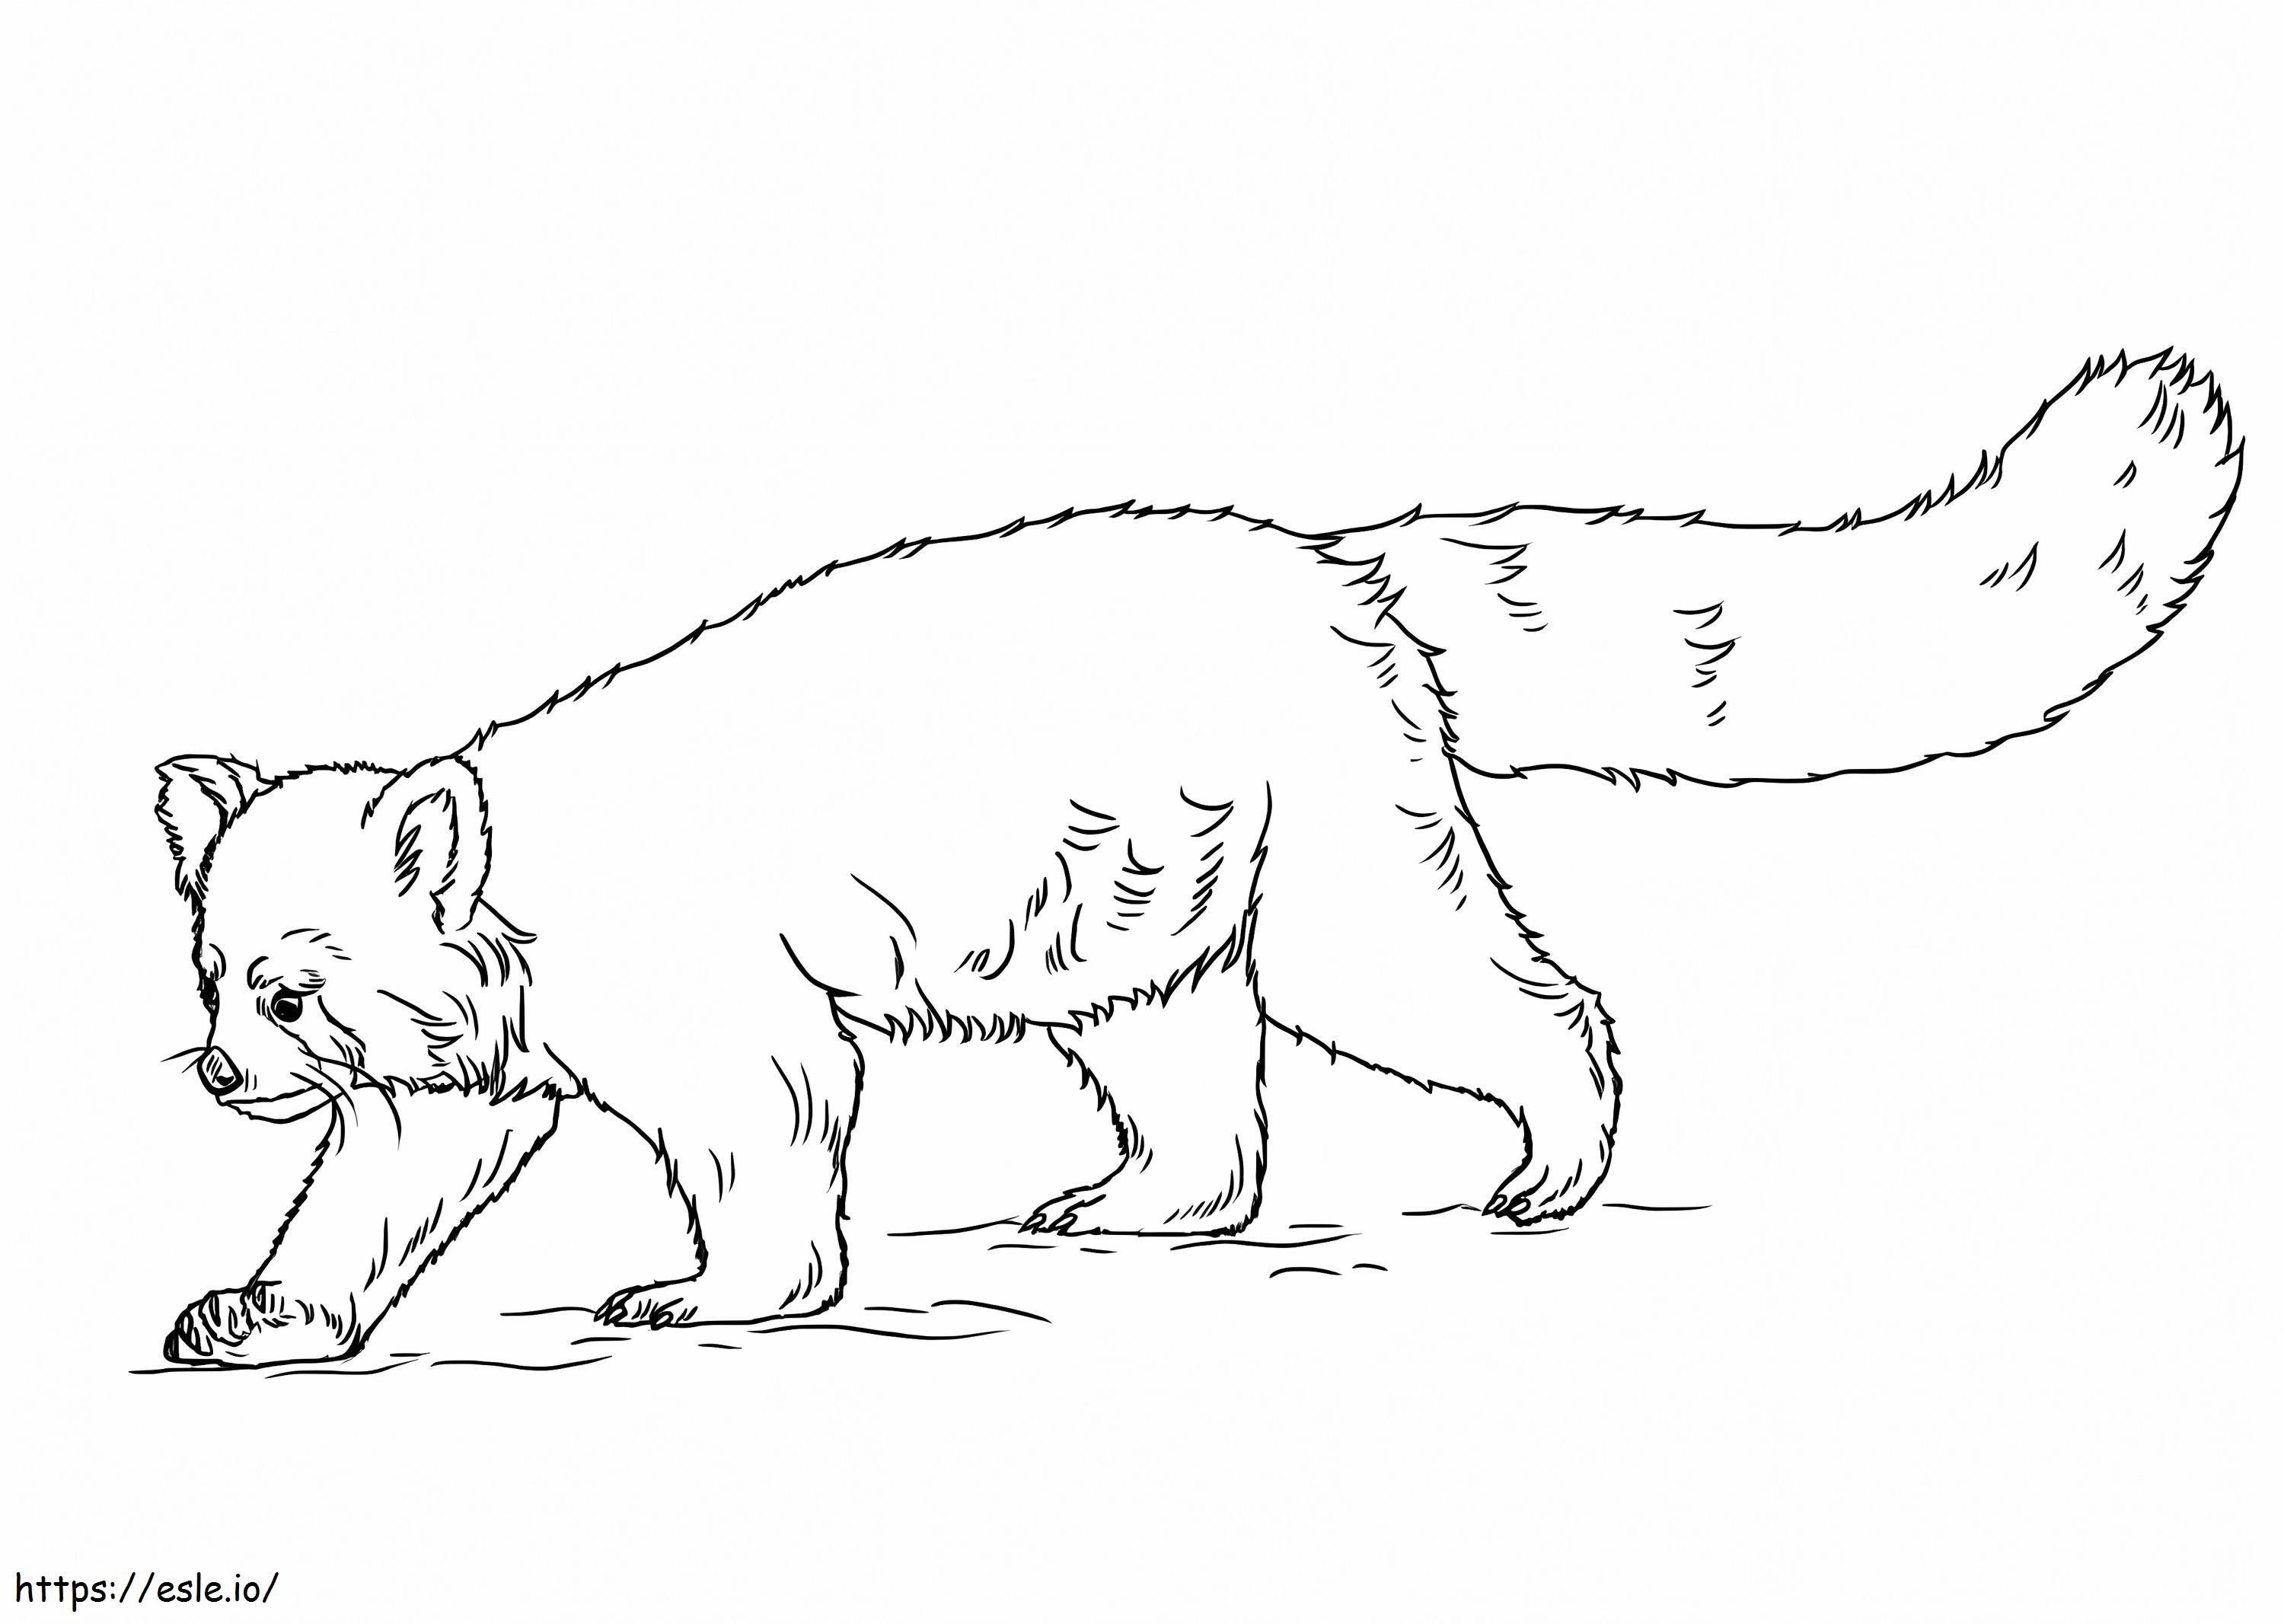 Normal Red Panda coloring page